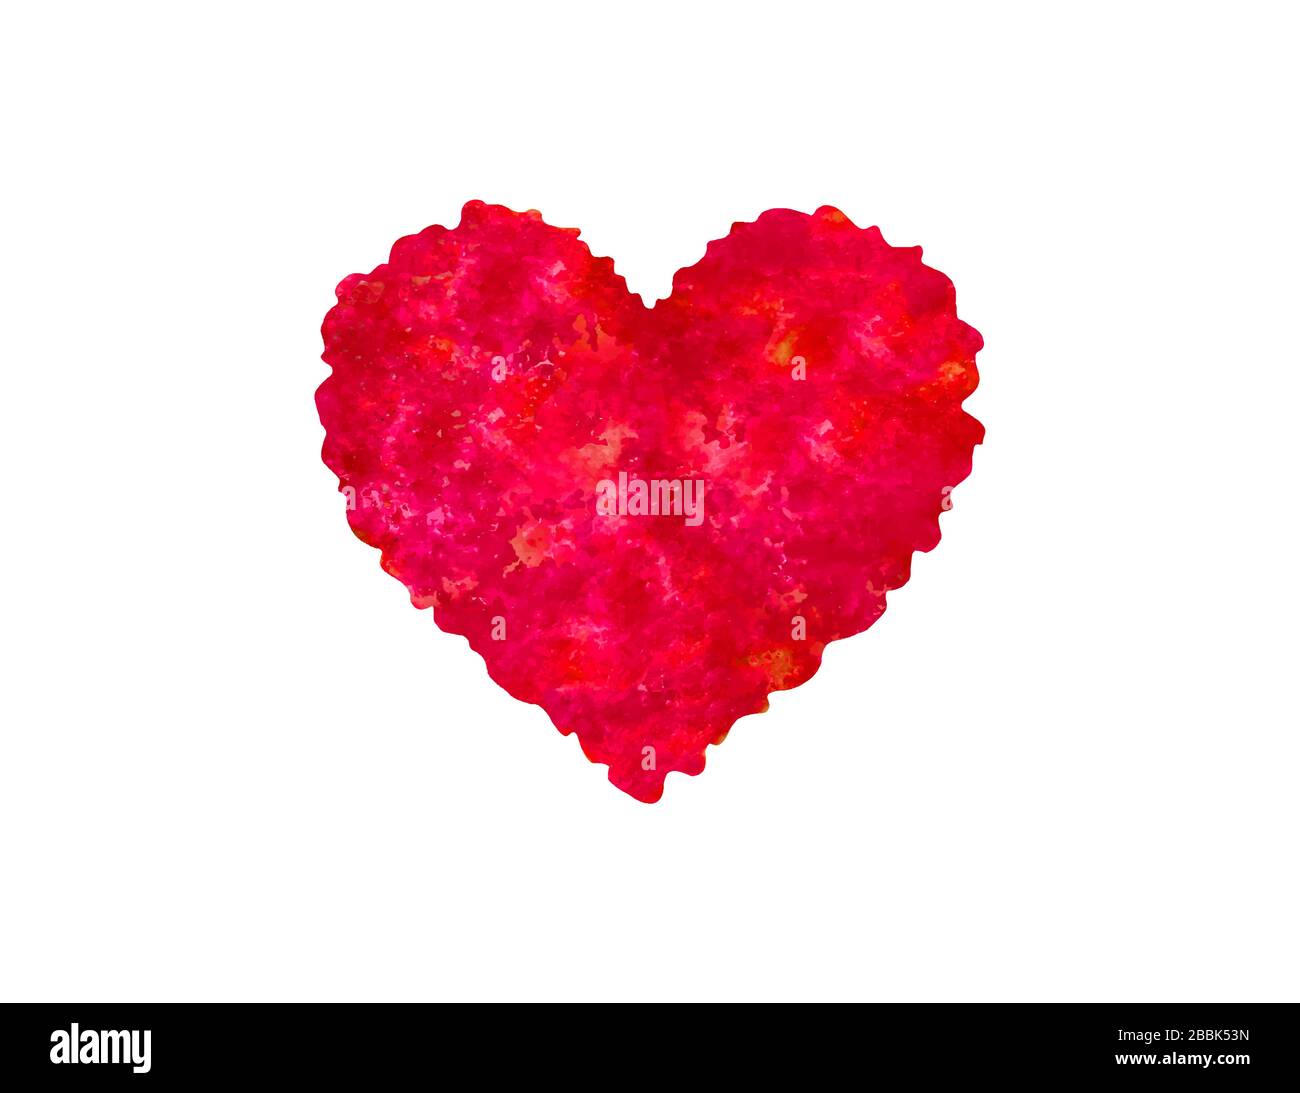 Vector illustration of red thank you stamp on white background